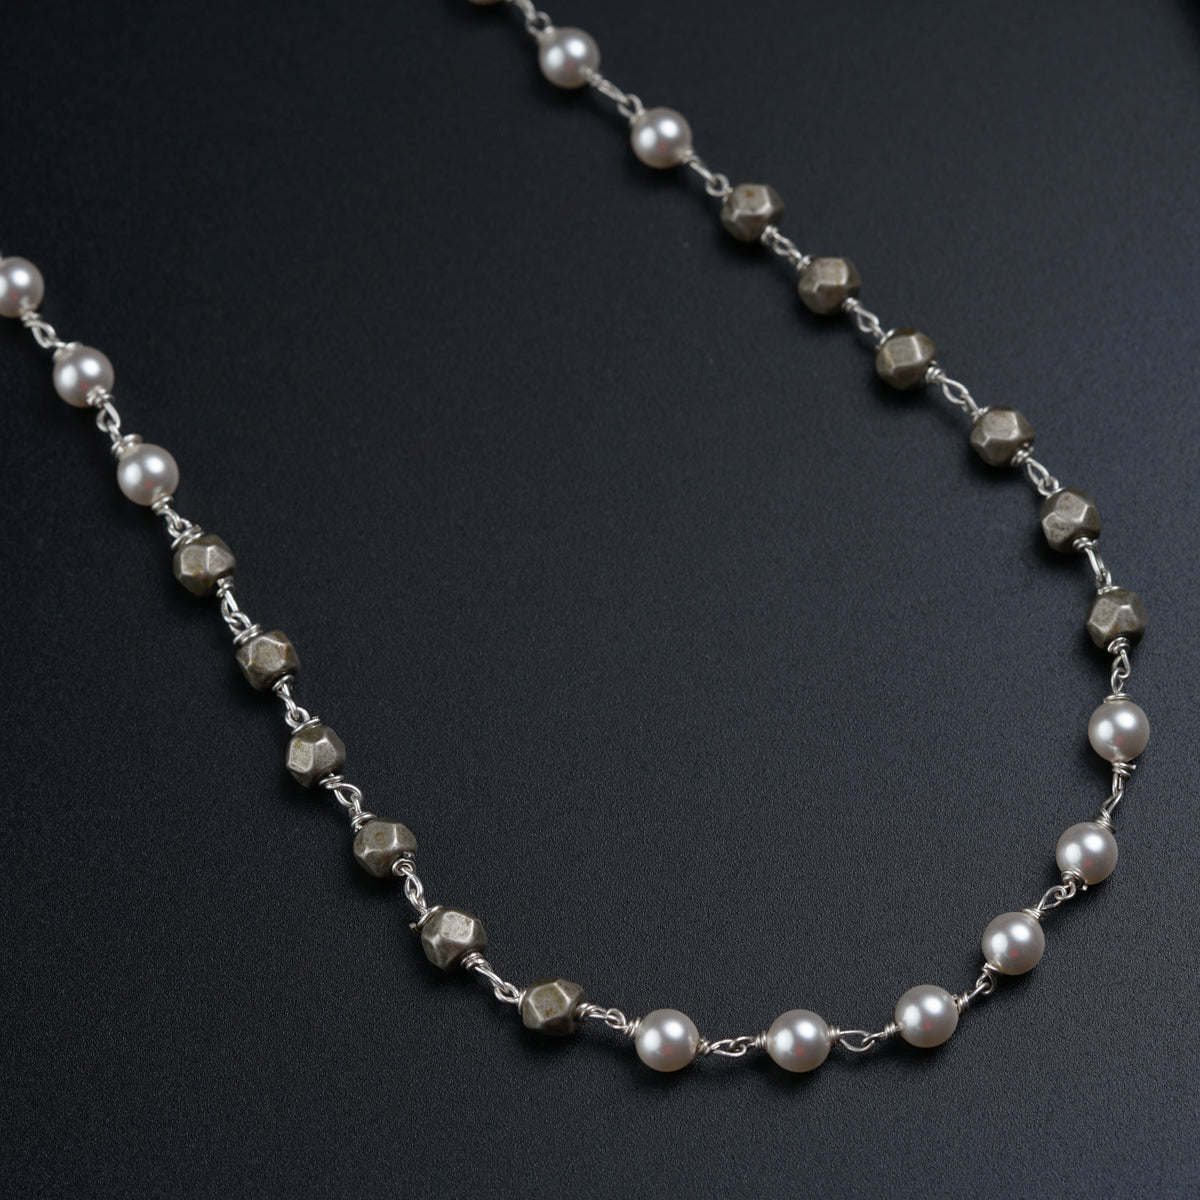 Silver Chain With Pearls and Pyrite stones